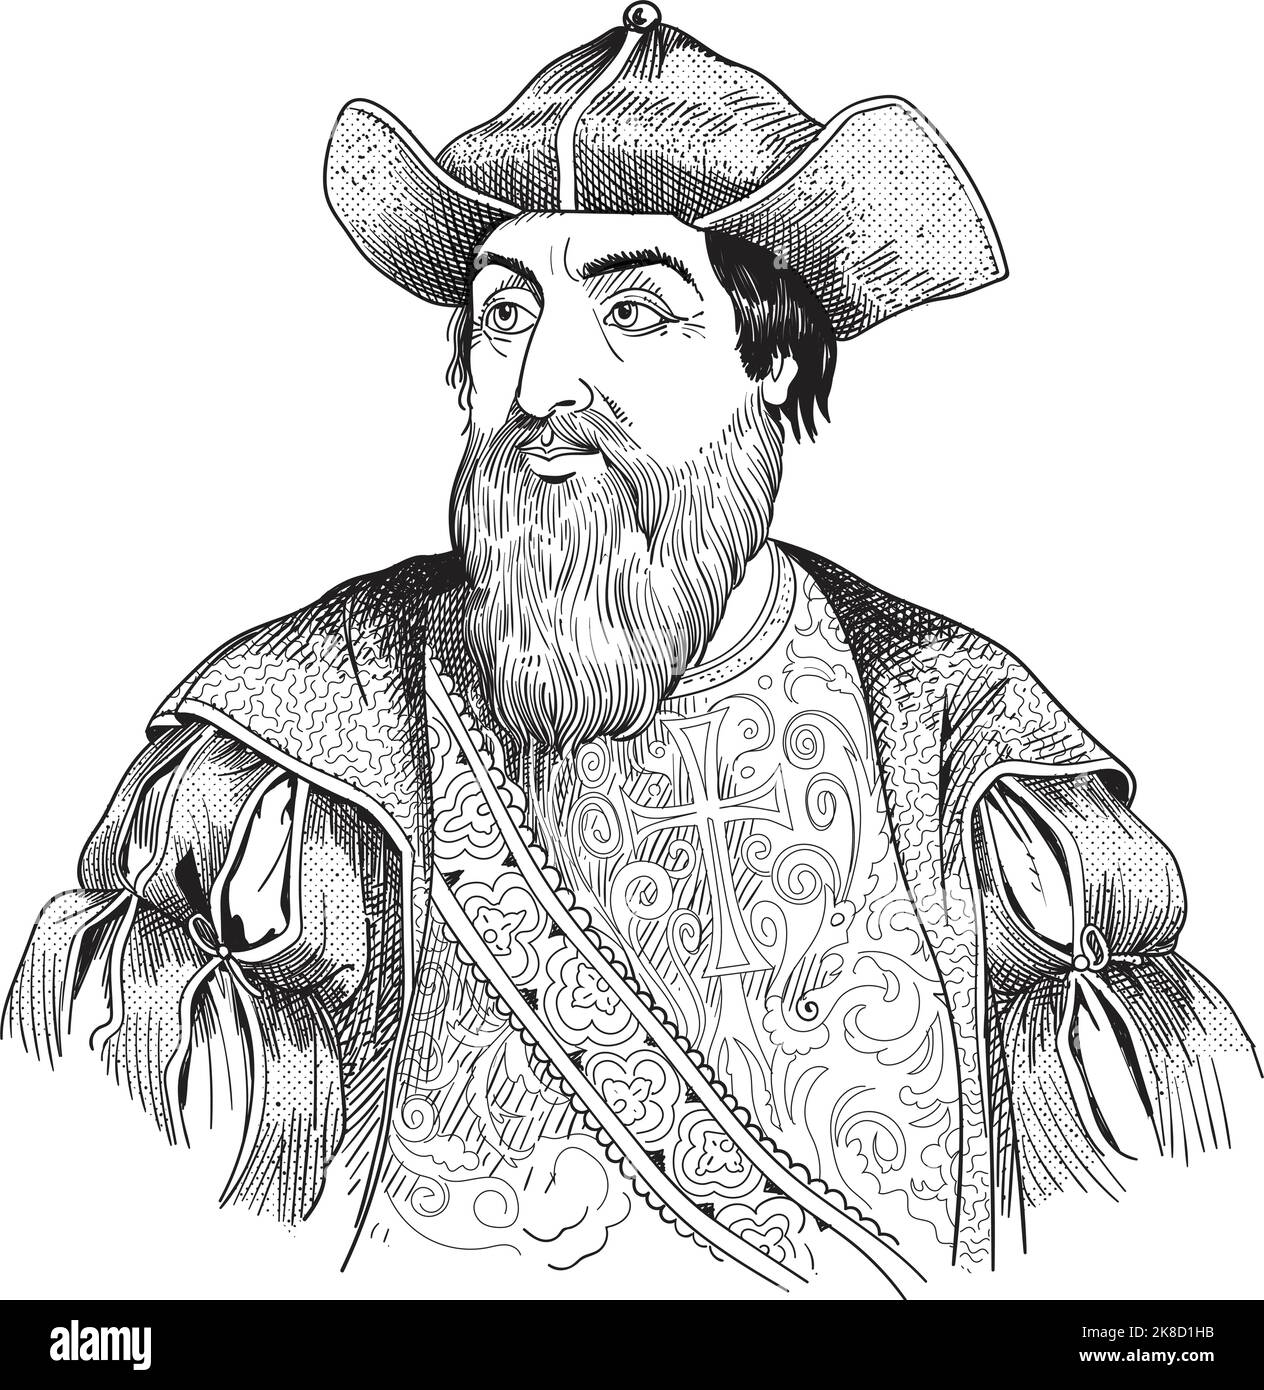 Vasco de Gama, who in 1498, rounded the Cape of Good Hope and sailed to Calicut, on the coast of Malabar. Vector illustration Stock Vector